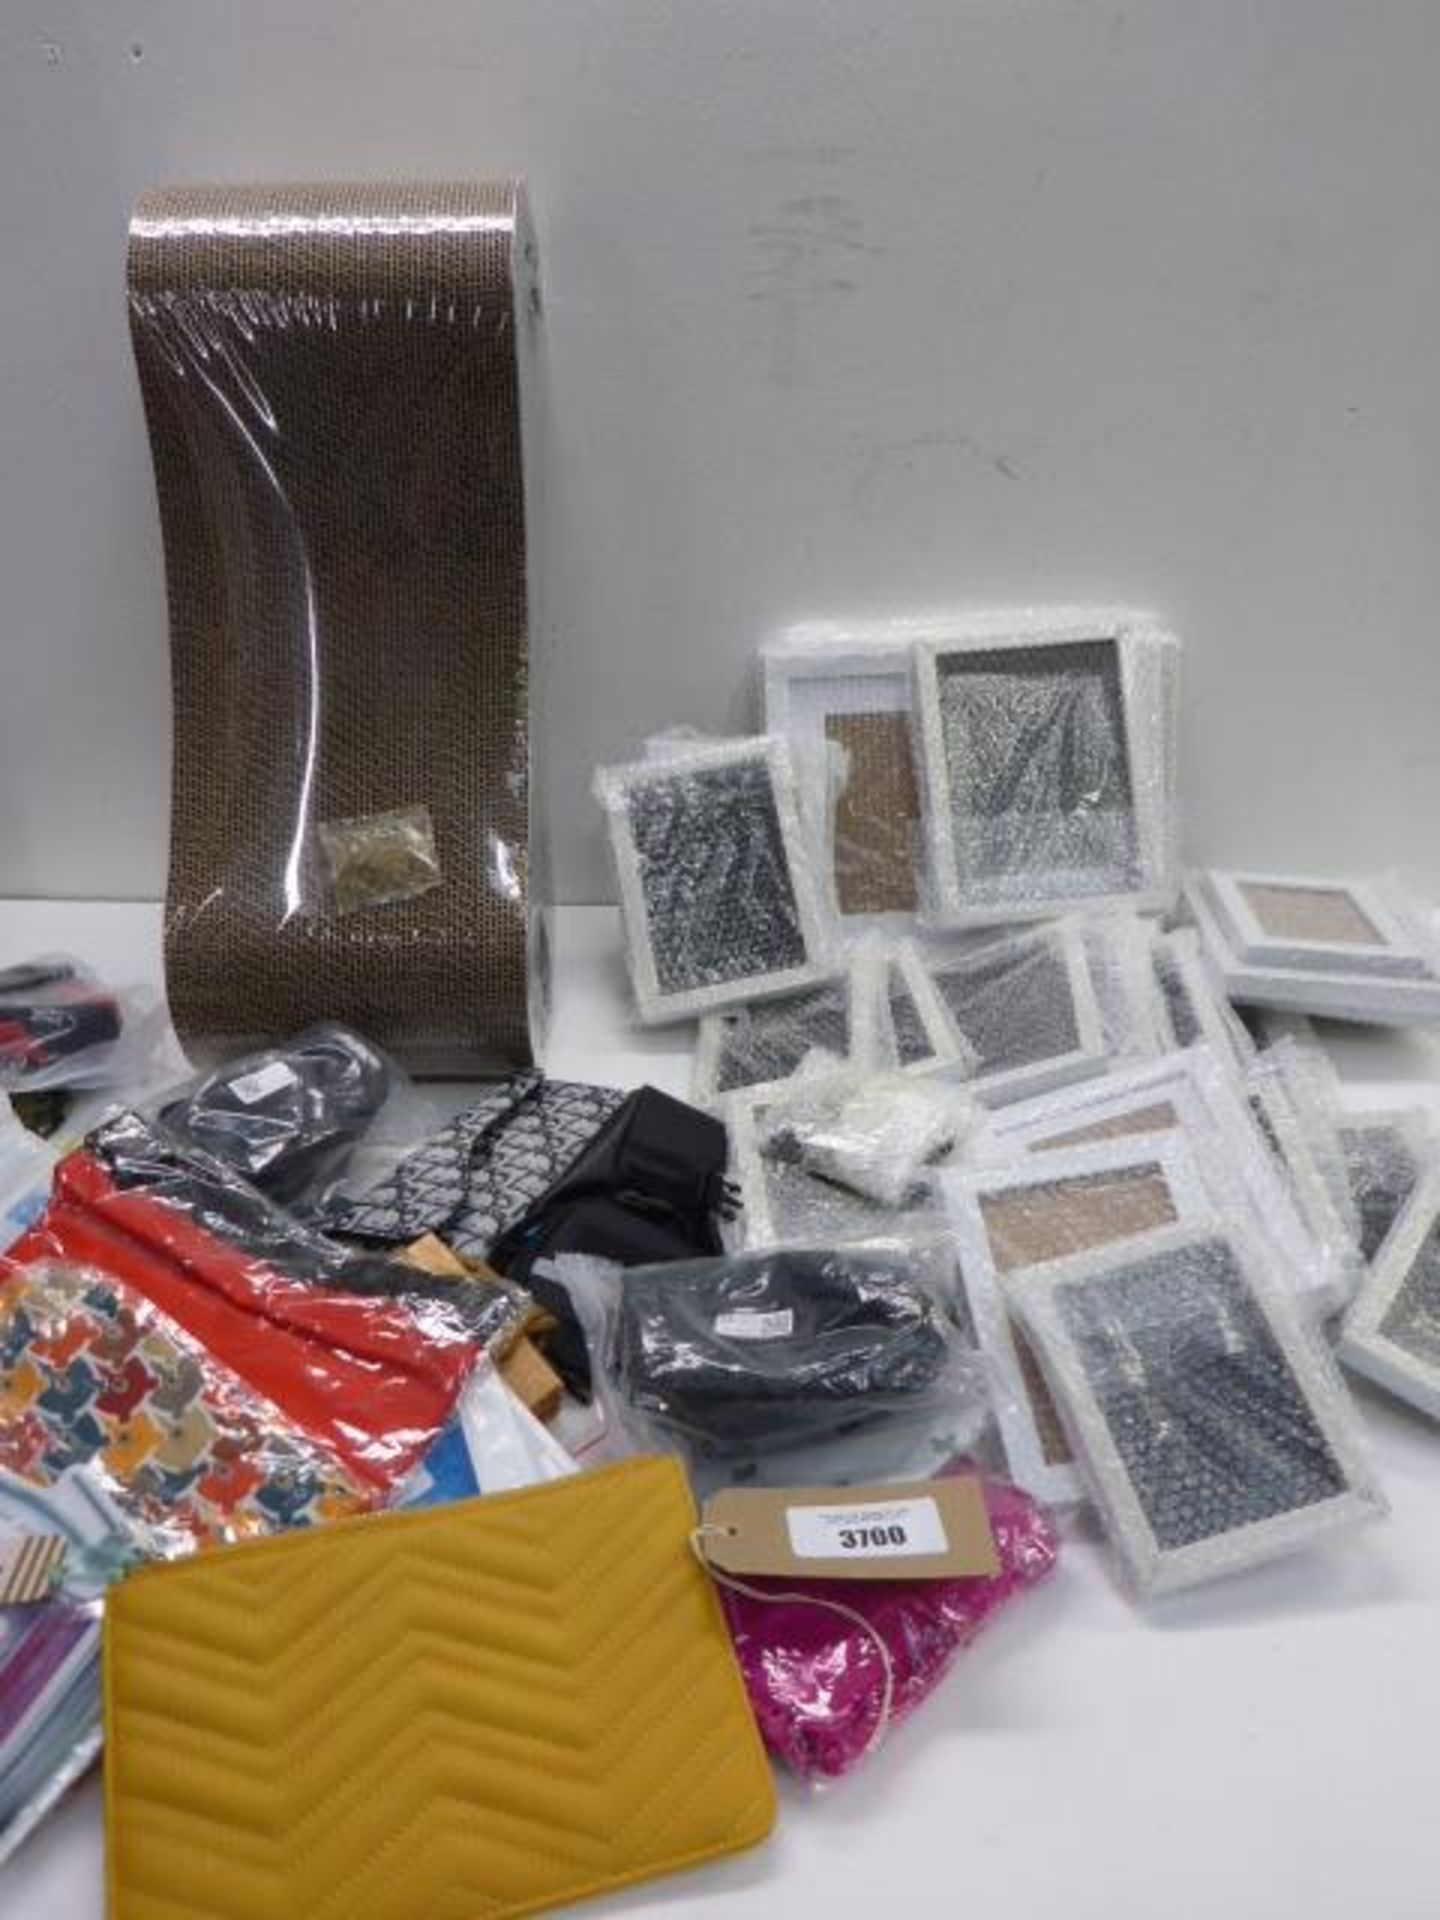 Cat scratch, varying size picture frames and selection of bags